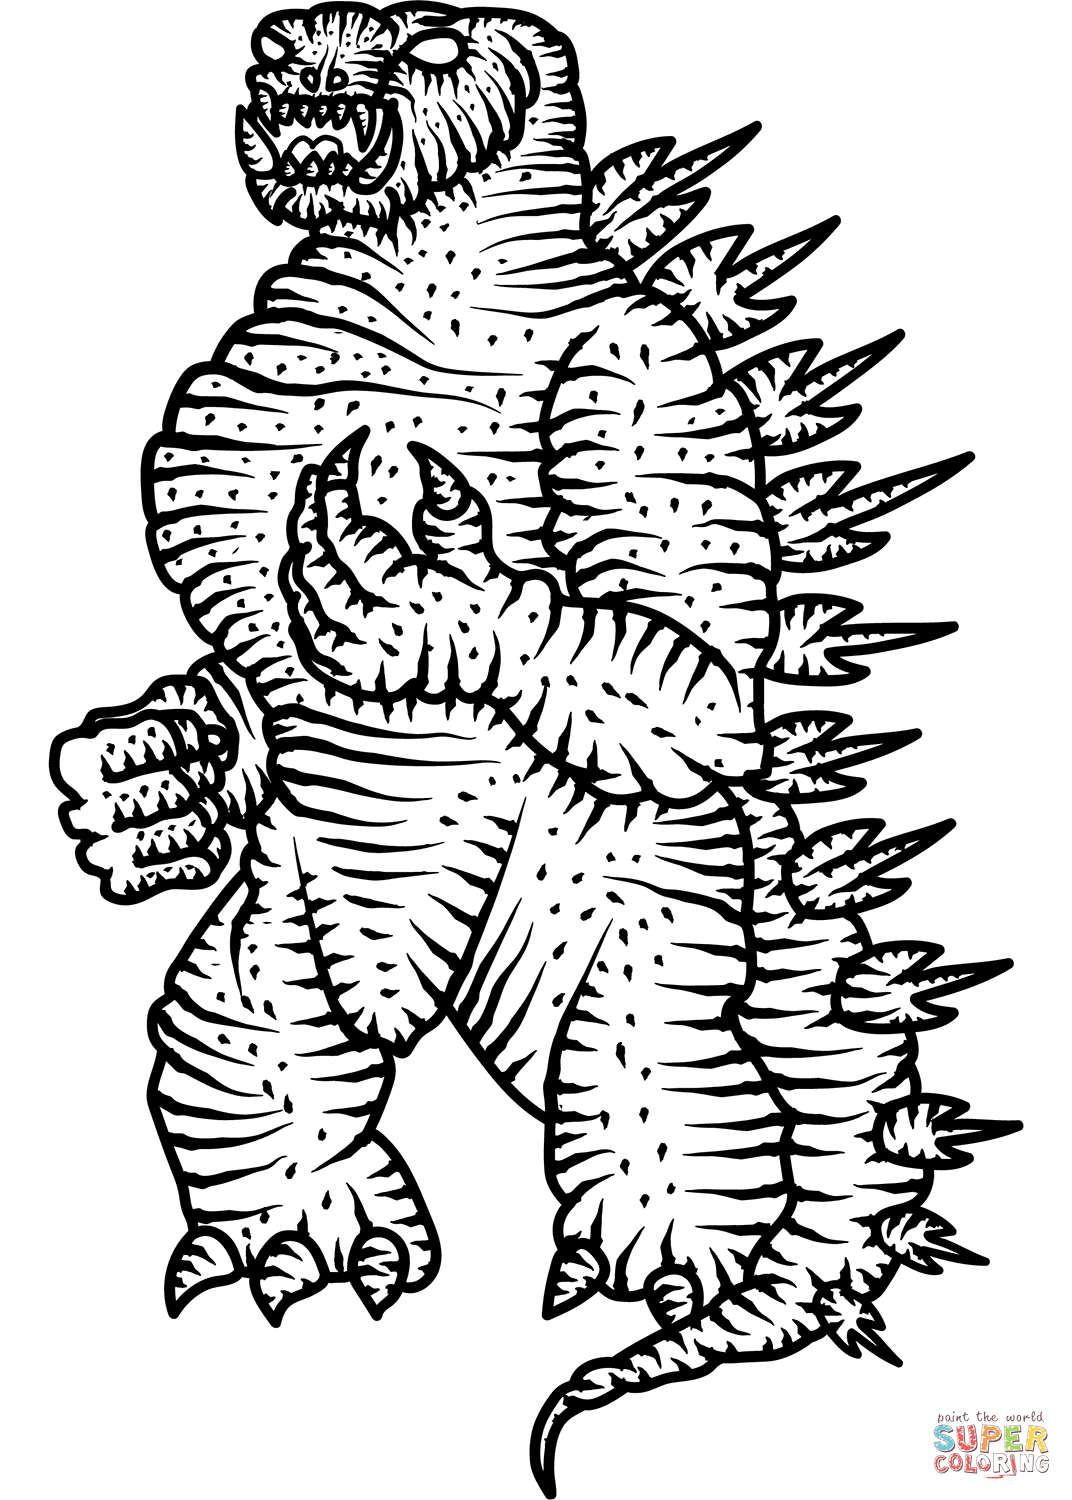 Godzilla coloring page free printable coloring pages